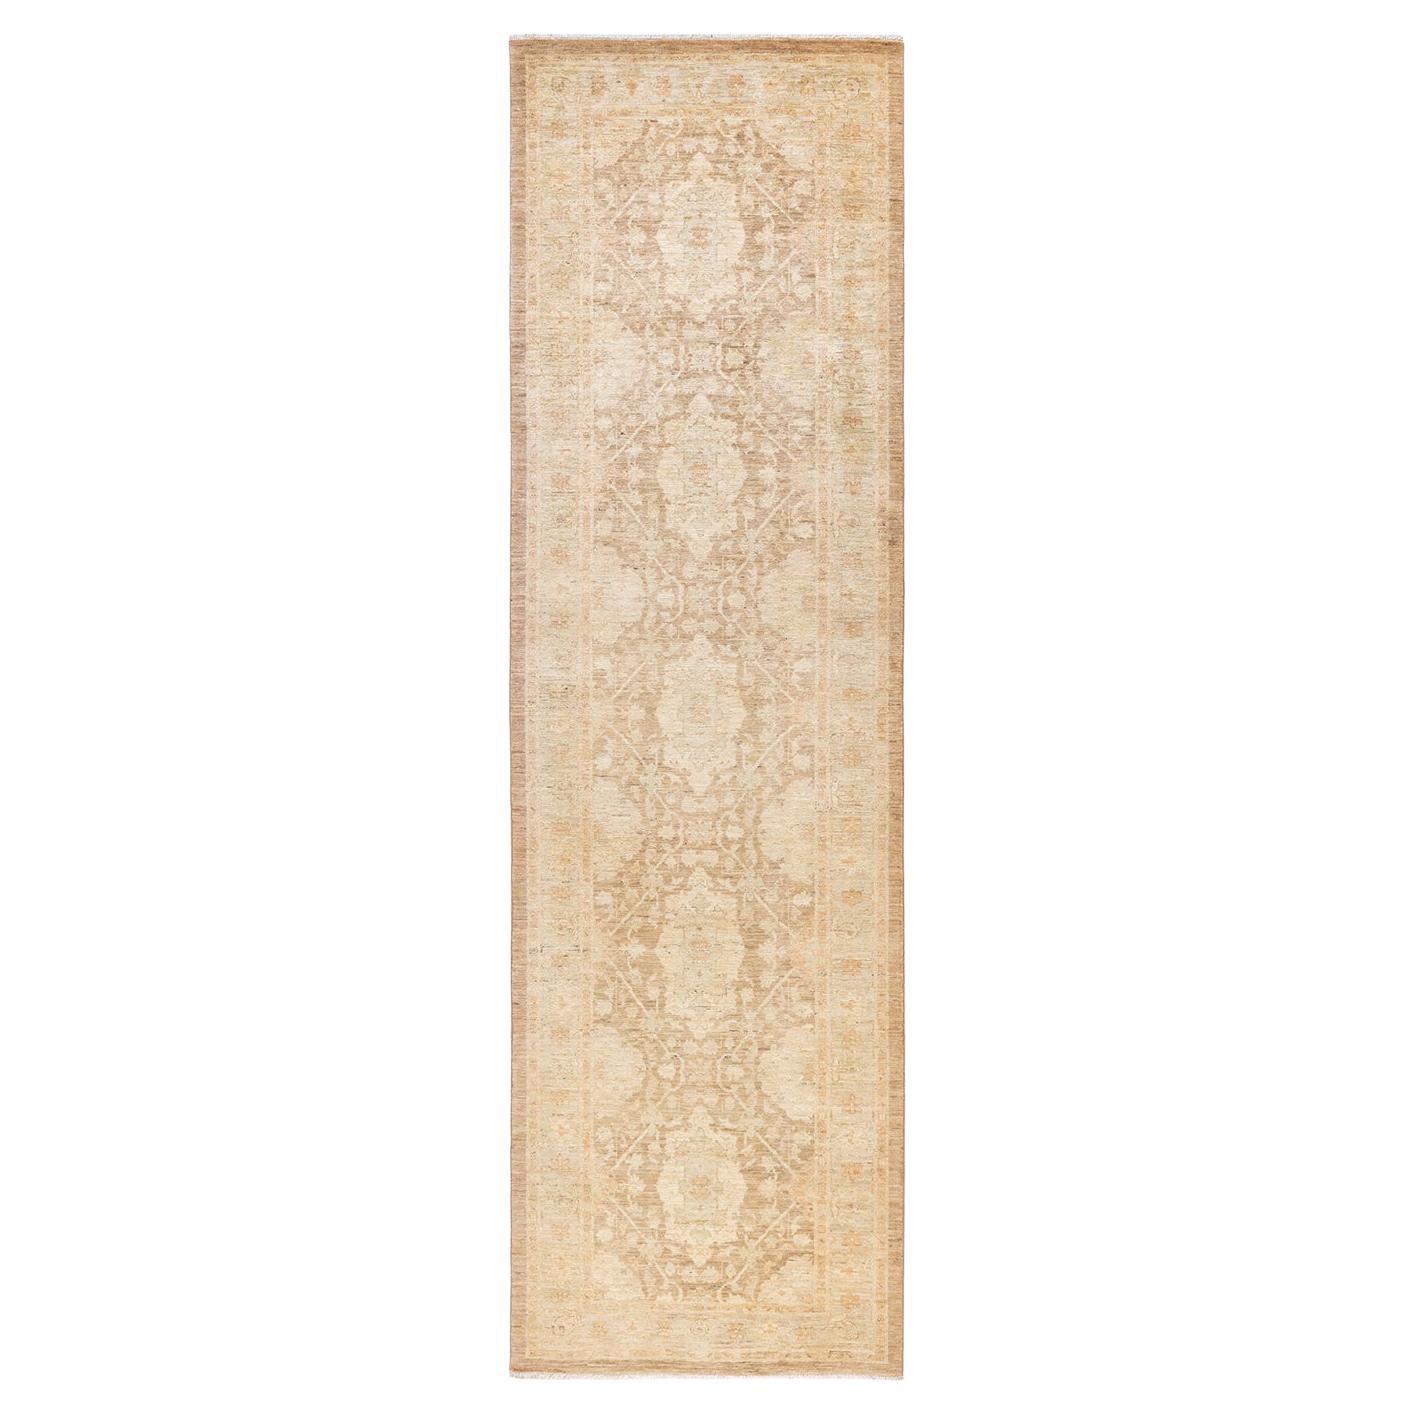 One-of-a-kind Hand Knotted Wool Eclectic Beige Area Rug